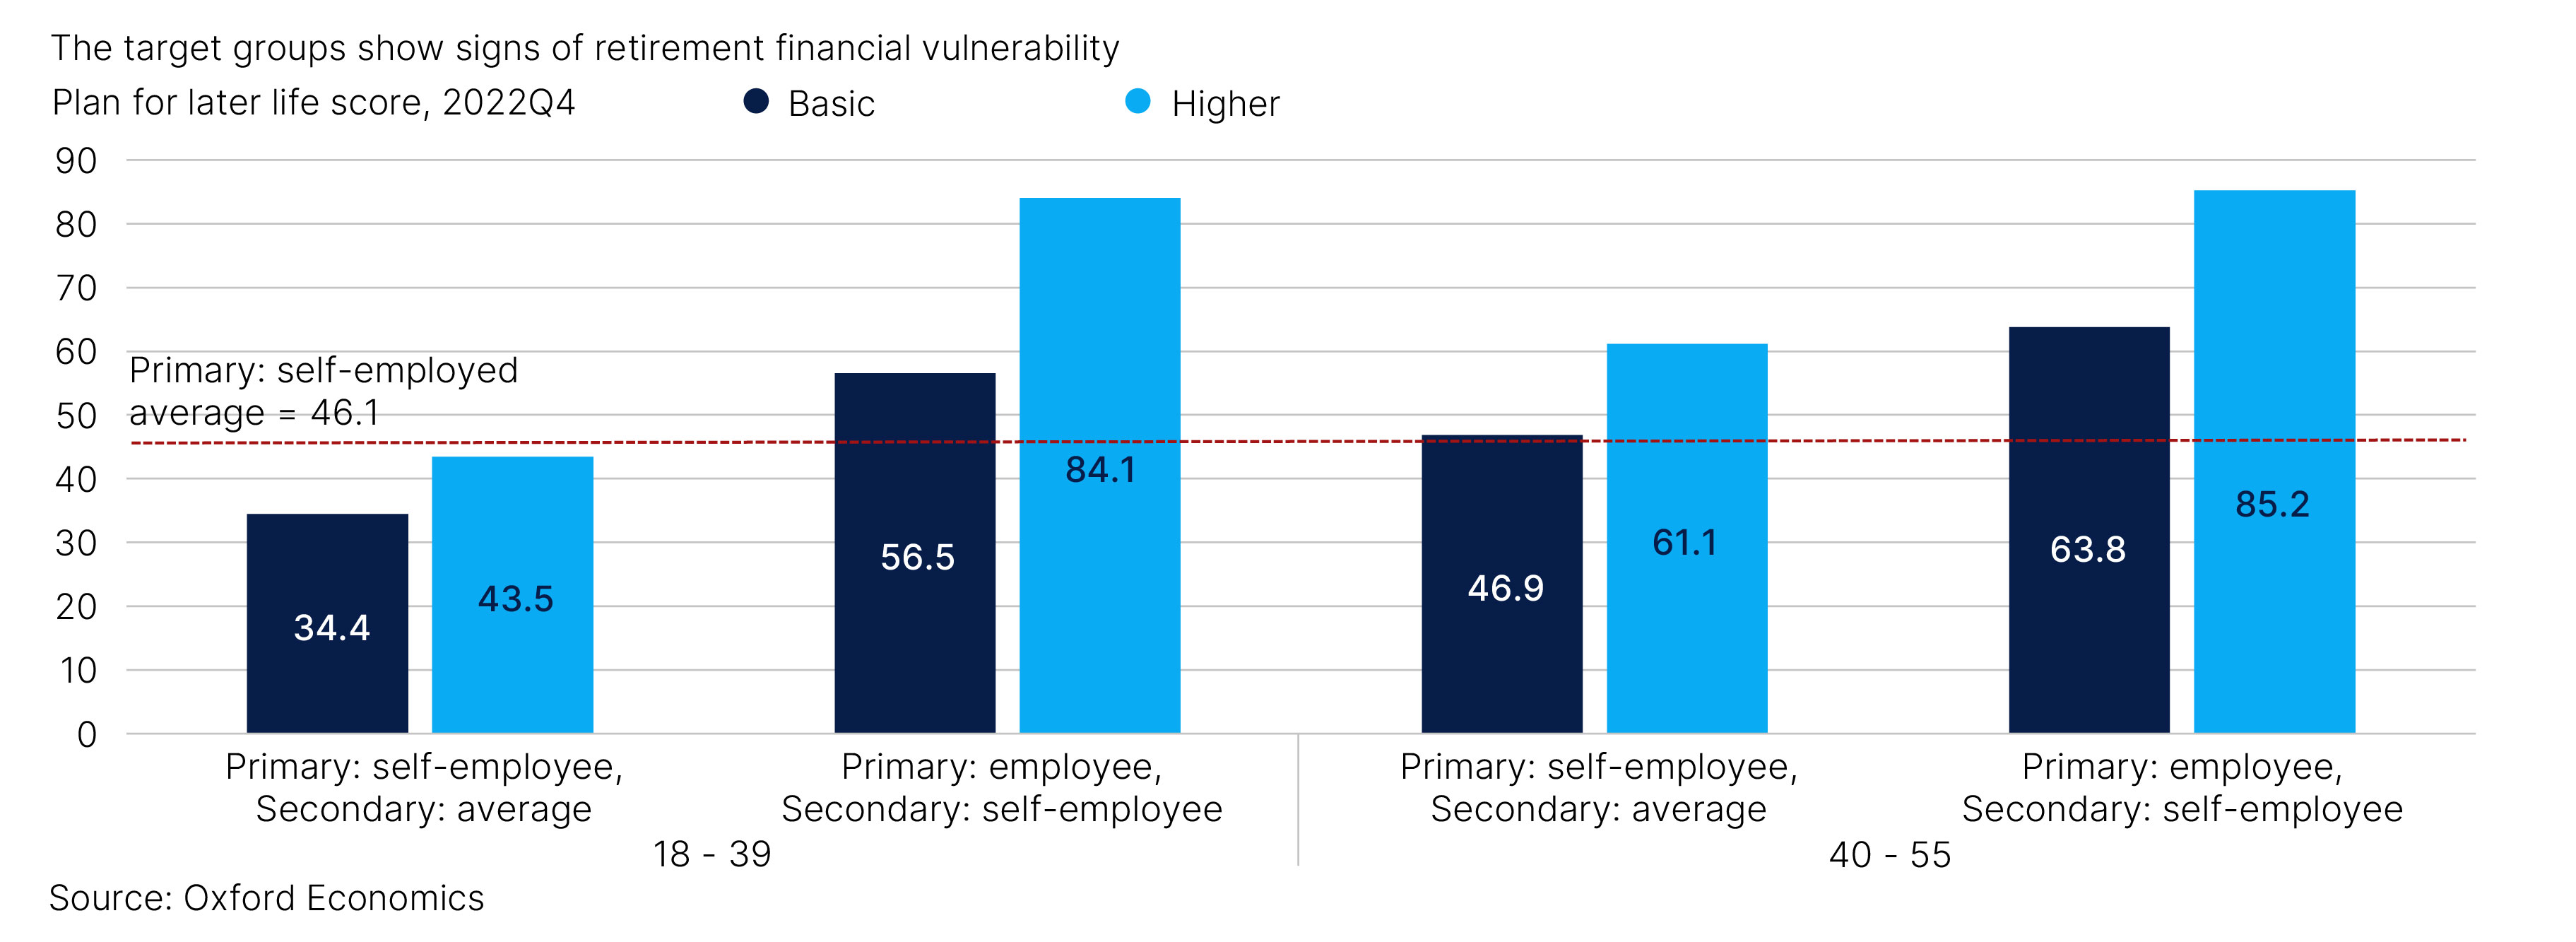 Fig. 11. The target groups show signs of retirement financial vulnerability 